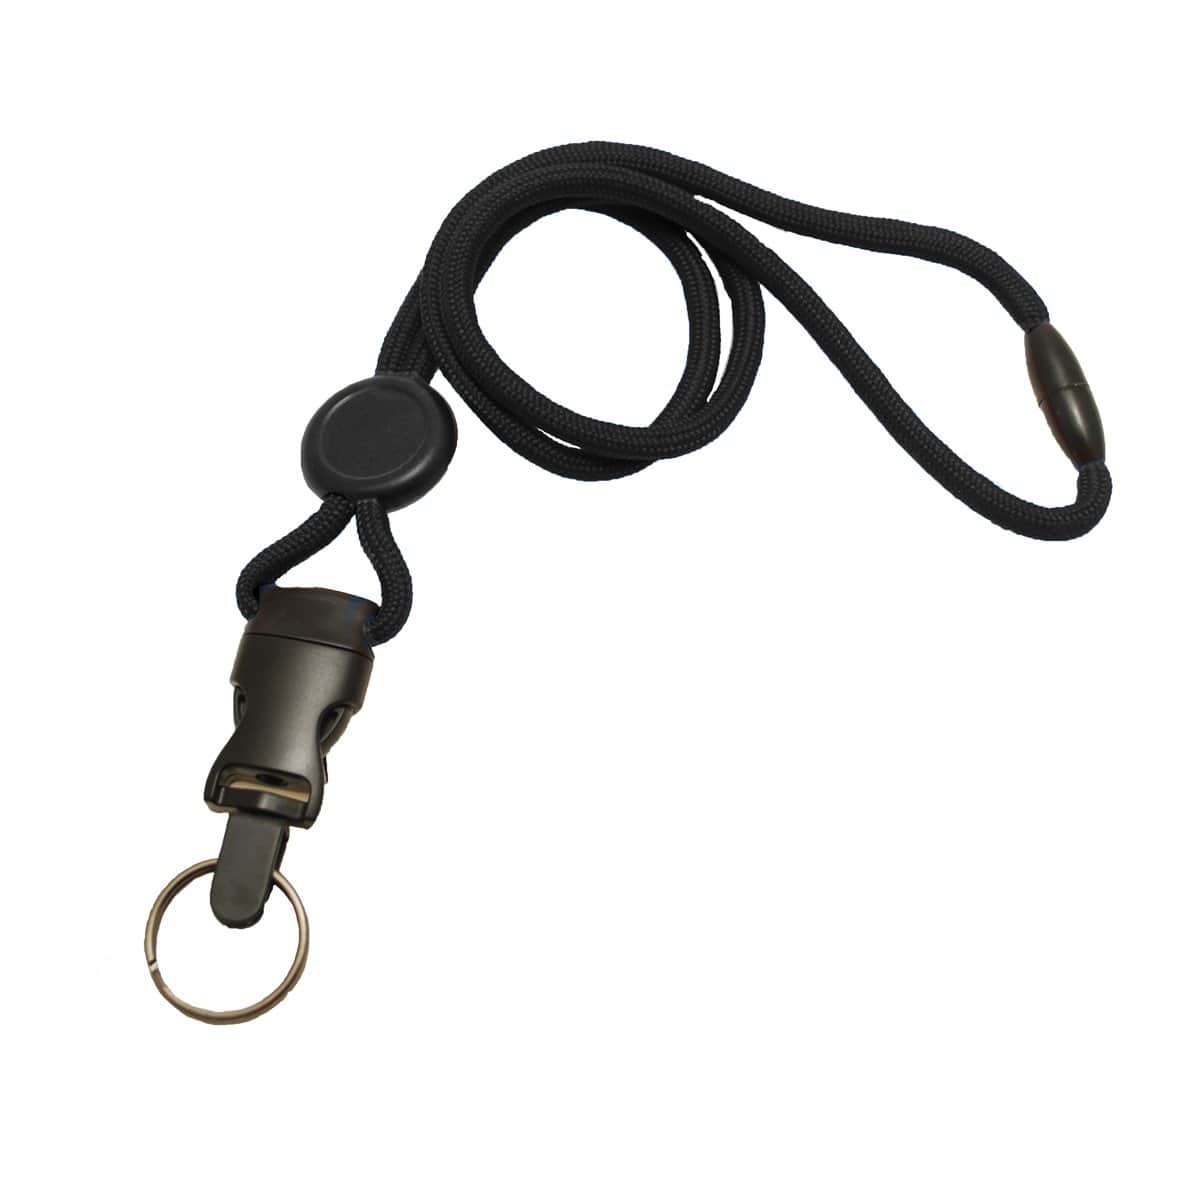 A black Breakaway Lanyard with Round Slider And Detachable Key Ring 2135-461X, breakaway safety features, and a detachable split ring for added convenience.